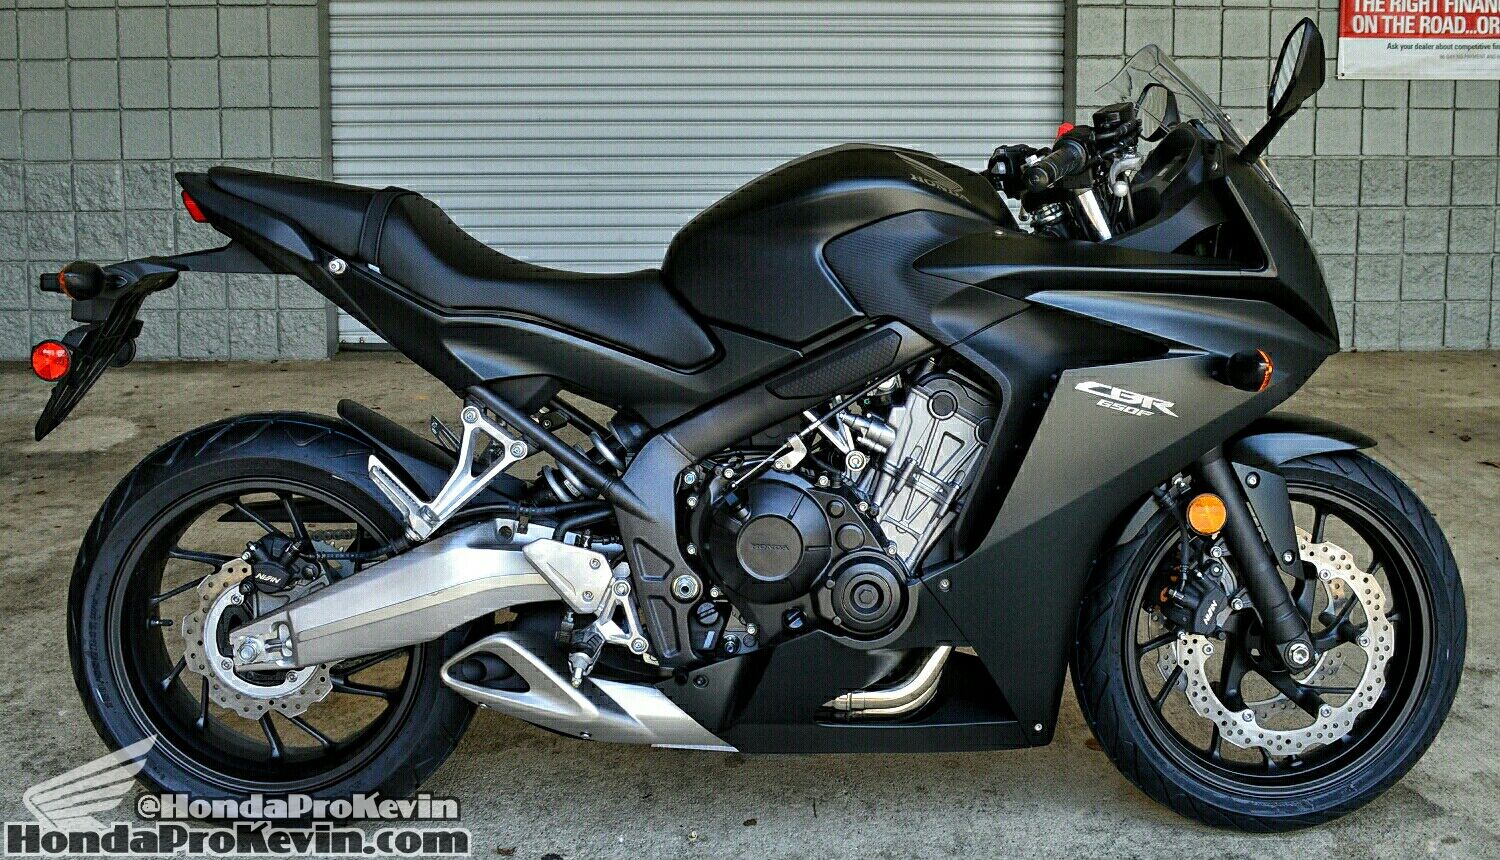 2014 Honda CBR650F ABS Review / Specs / Pictures & Videos